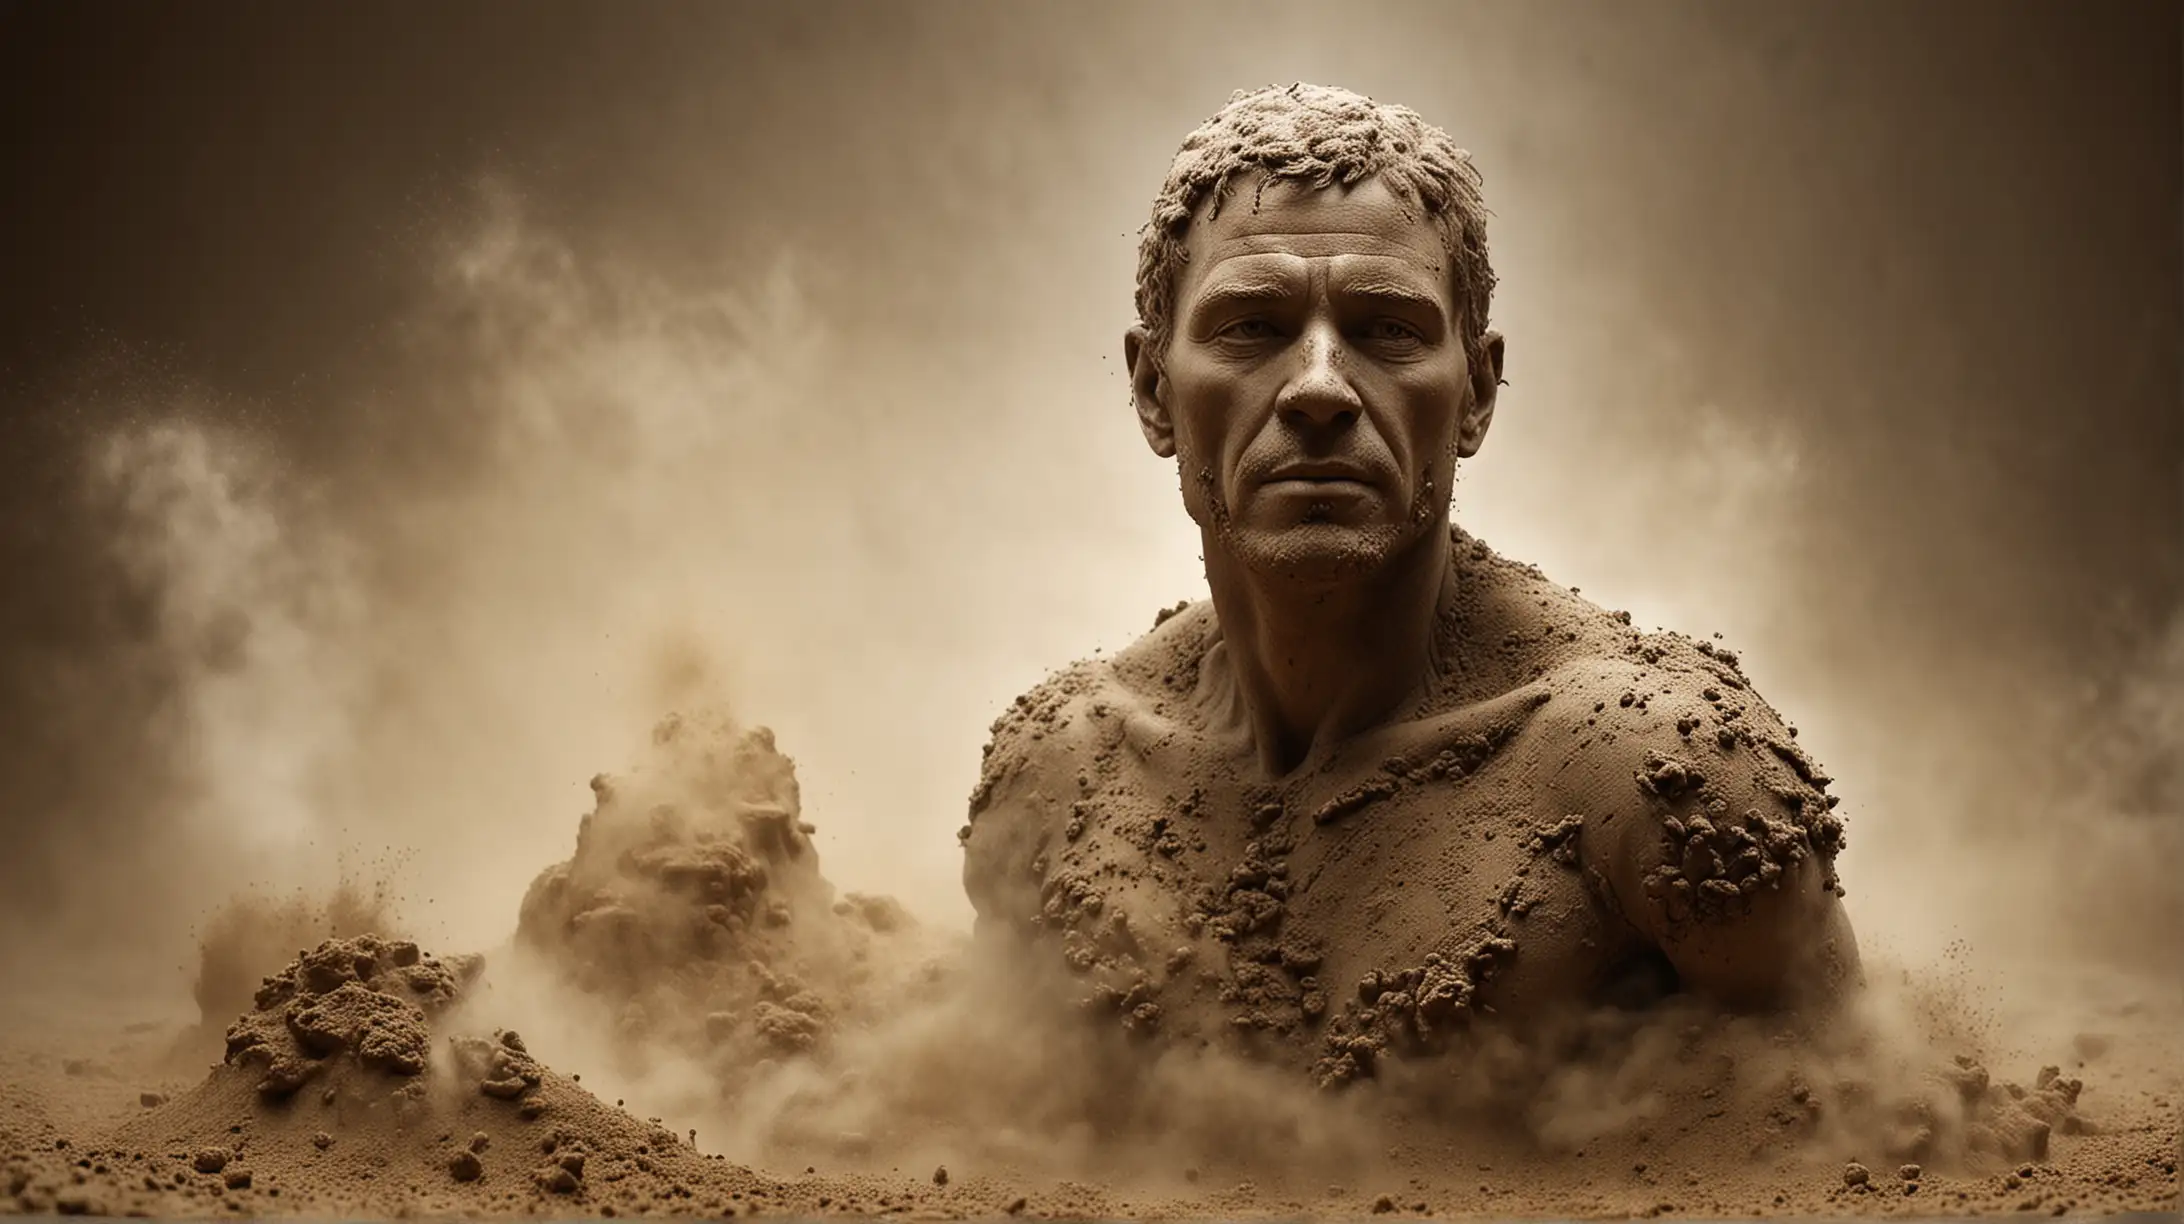 Realistic Sculpture of a Man Crafted from Earth Dust